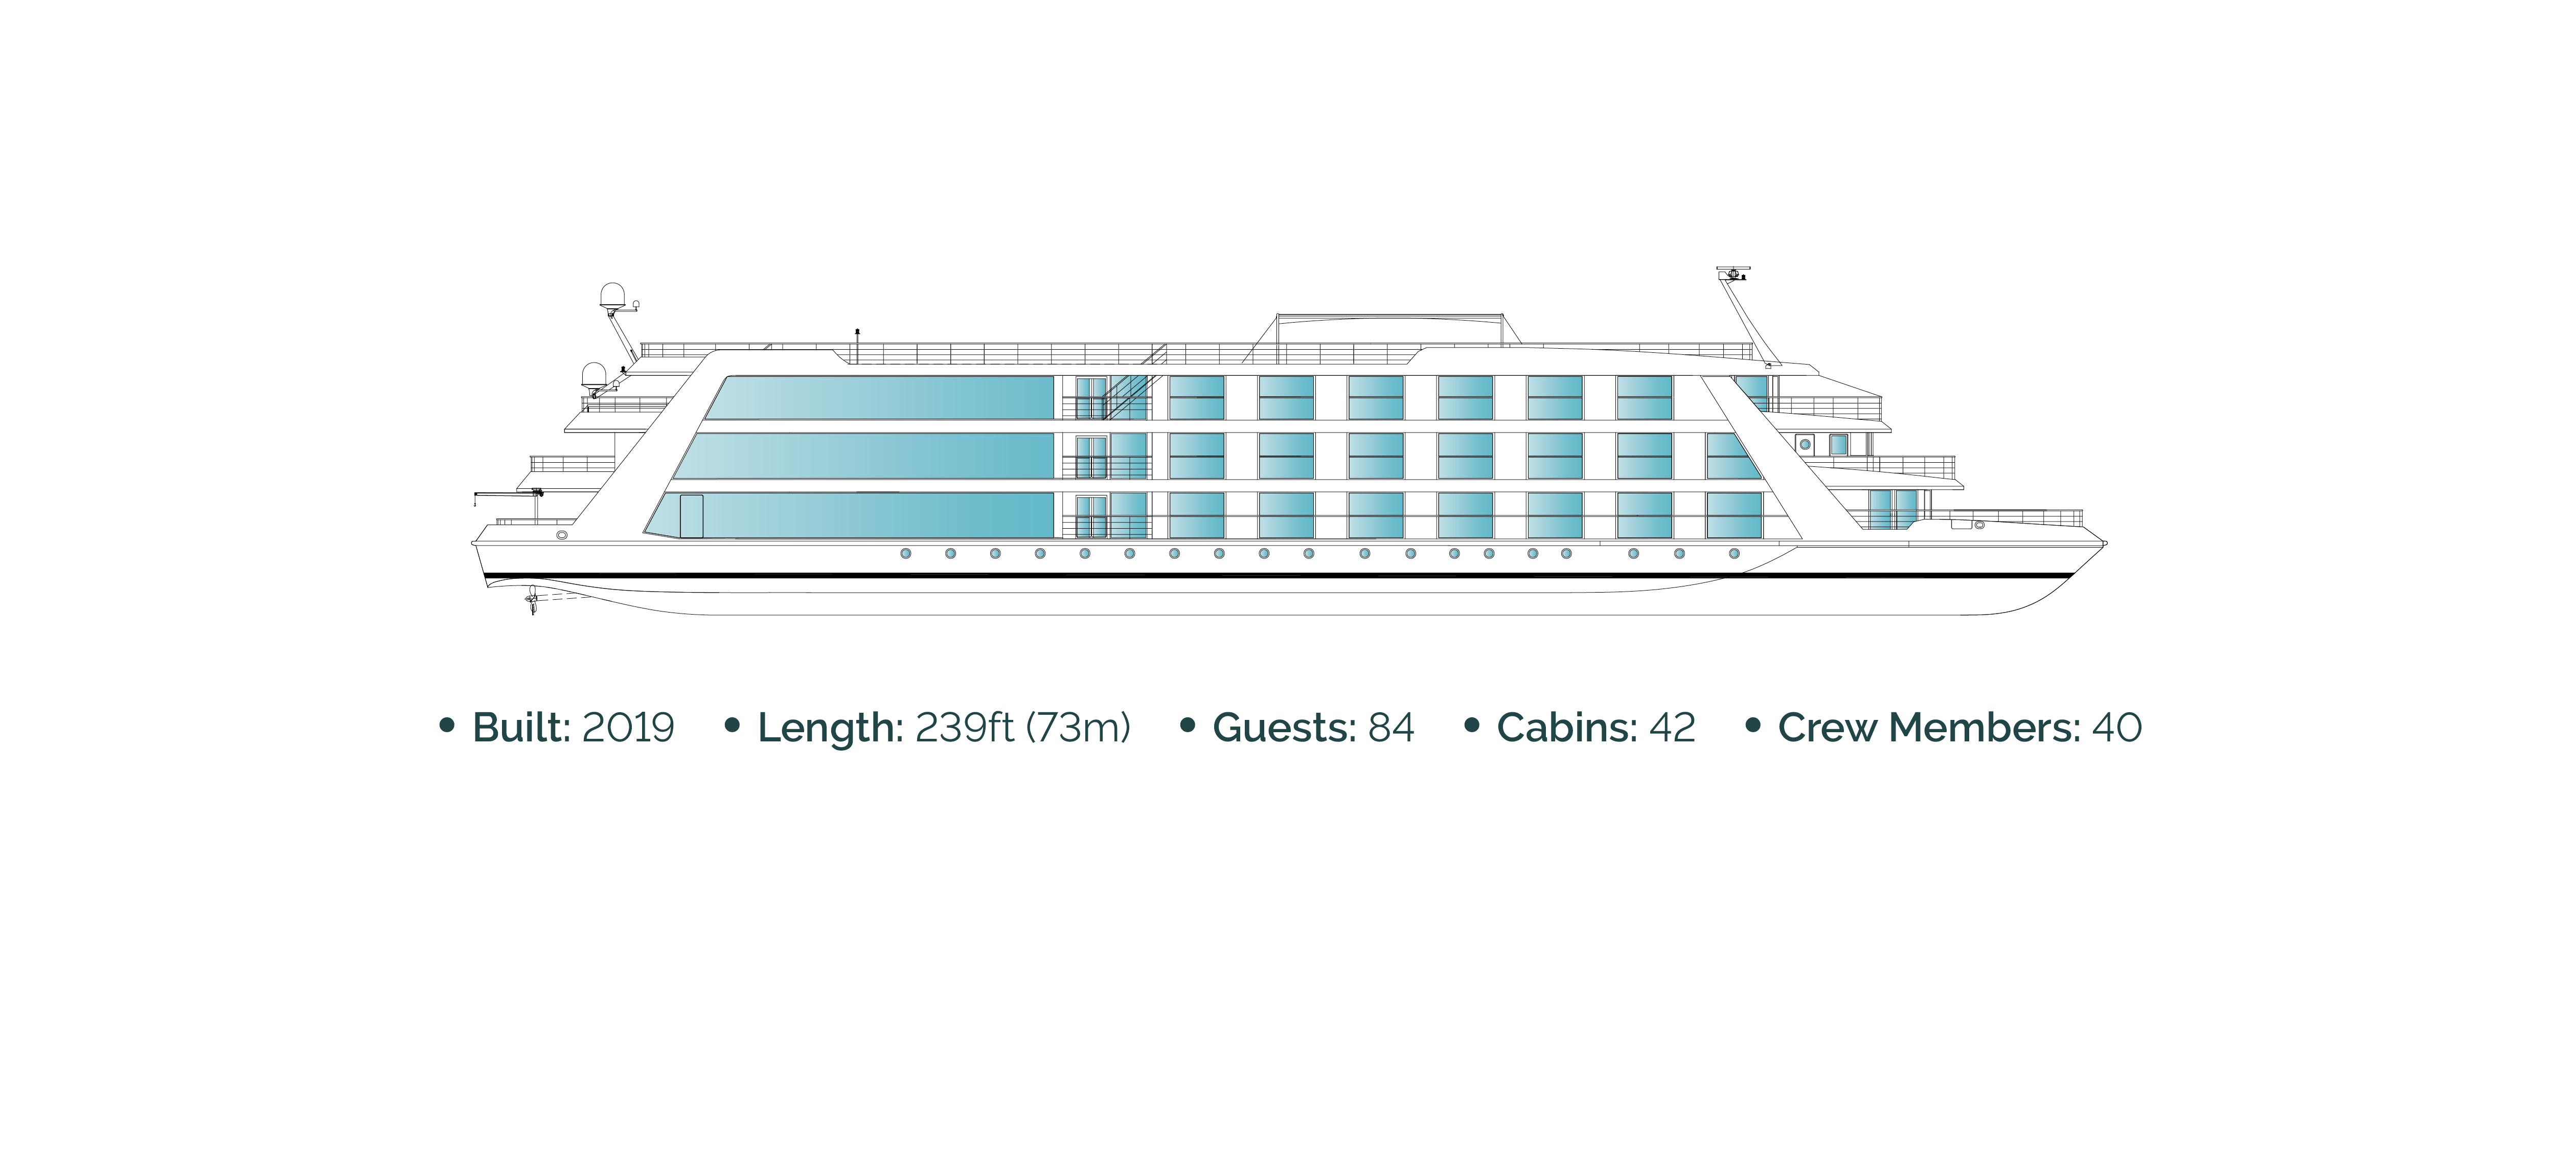 Side view diagram of Mekong river cruise ship, Emerald Harmony